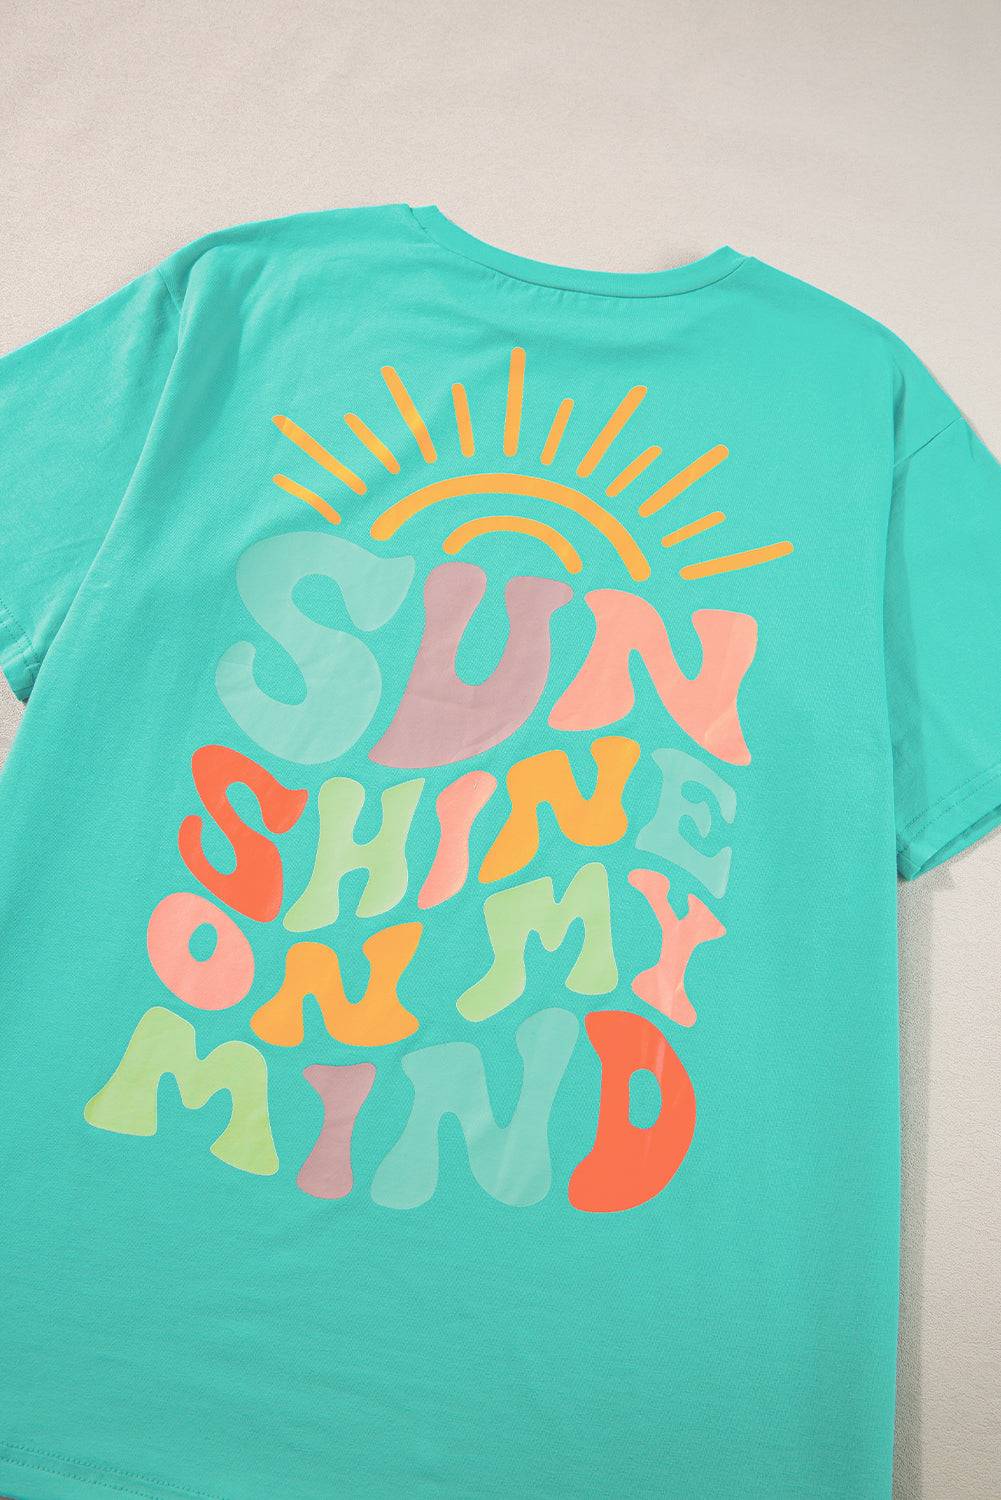 a t - shirt with the words sun shine on it